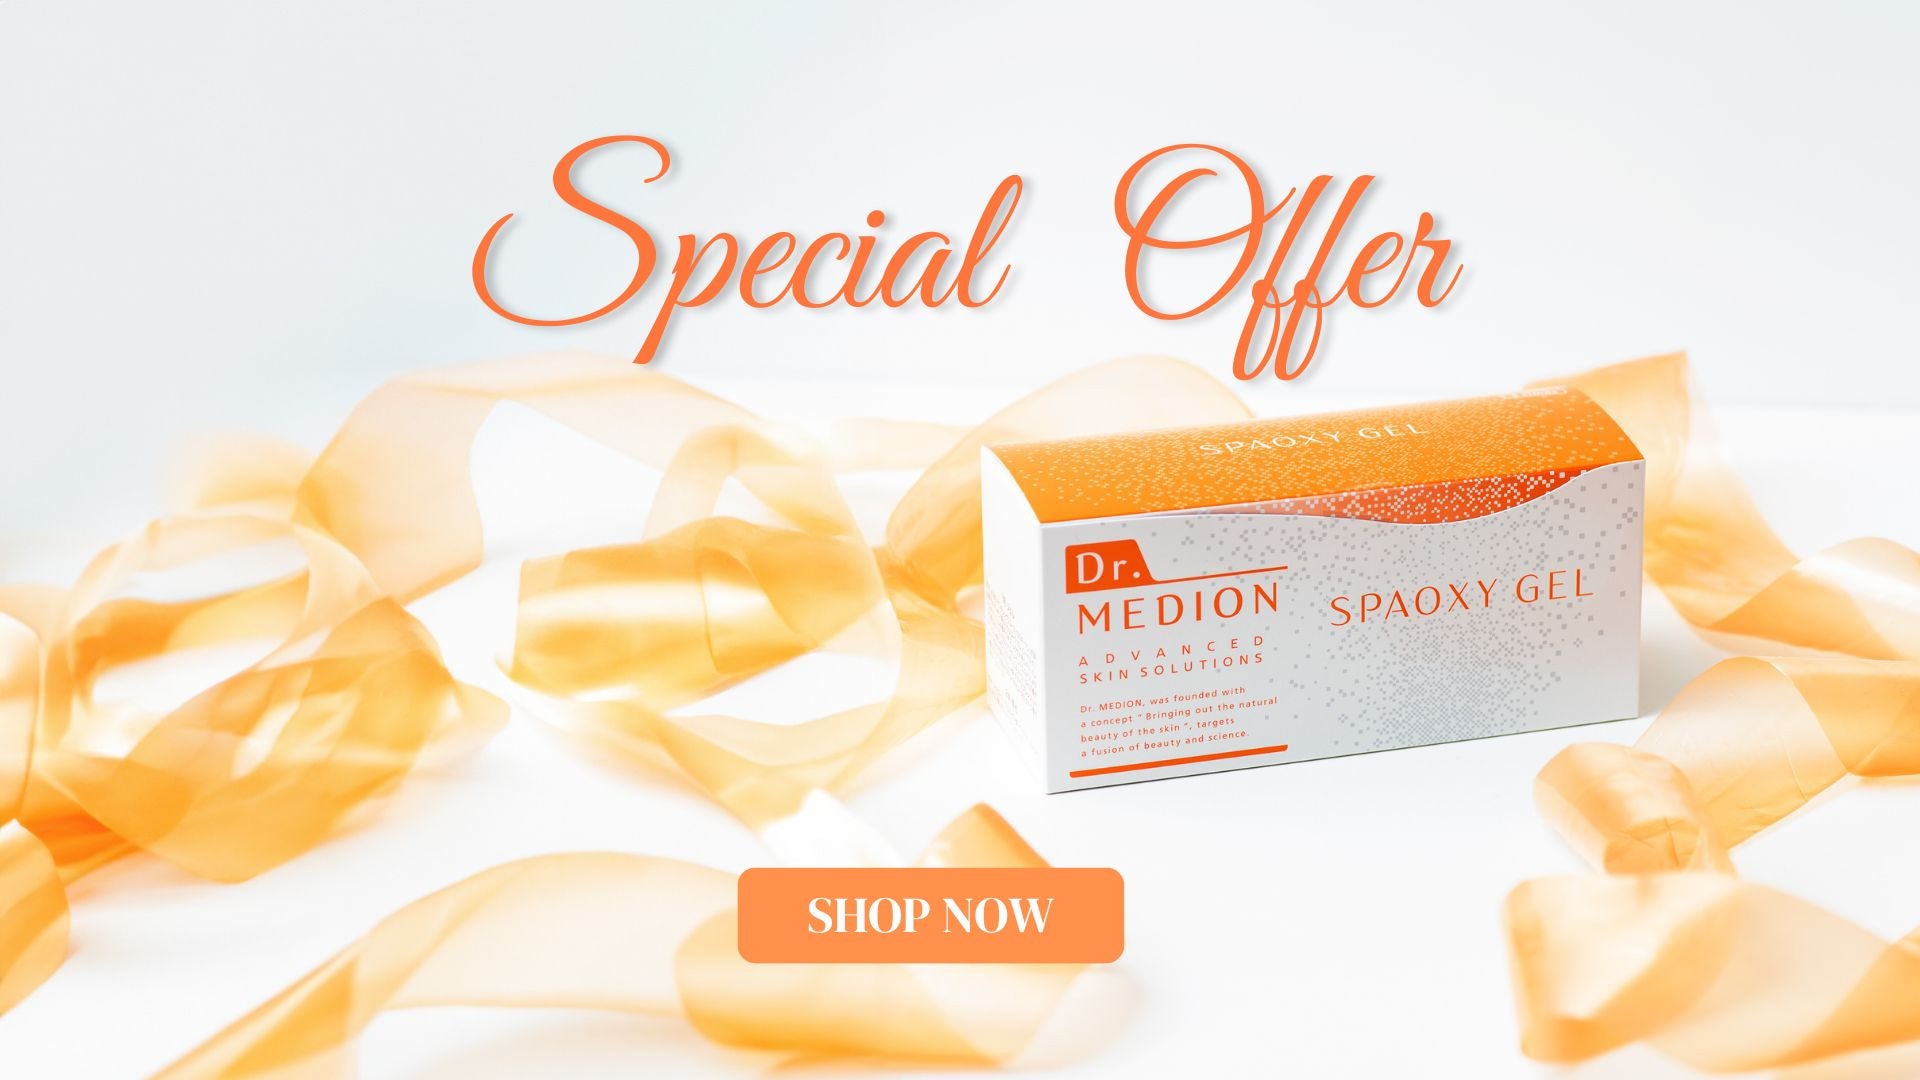 Dr. MEDION Spaoxy Mask products